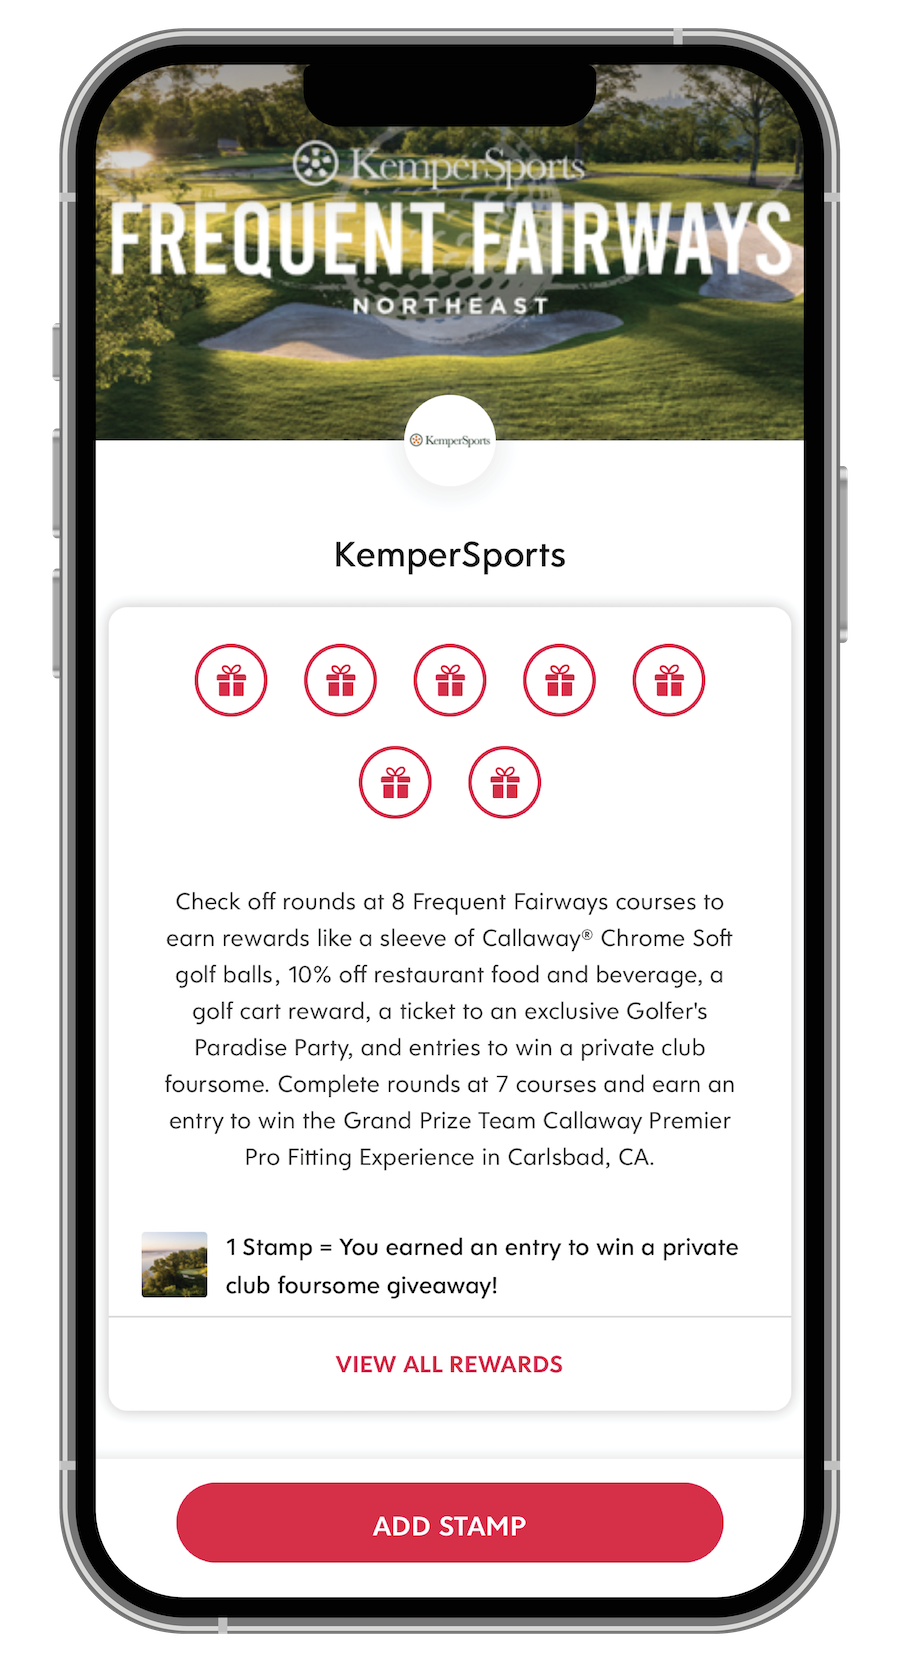 A screenshot of the homepage on the KemperSports Frequent Fairways Northeast app.